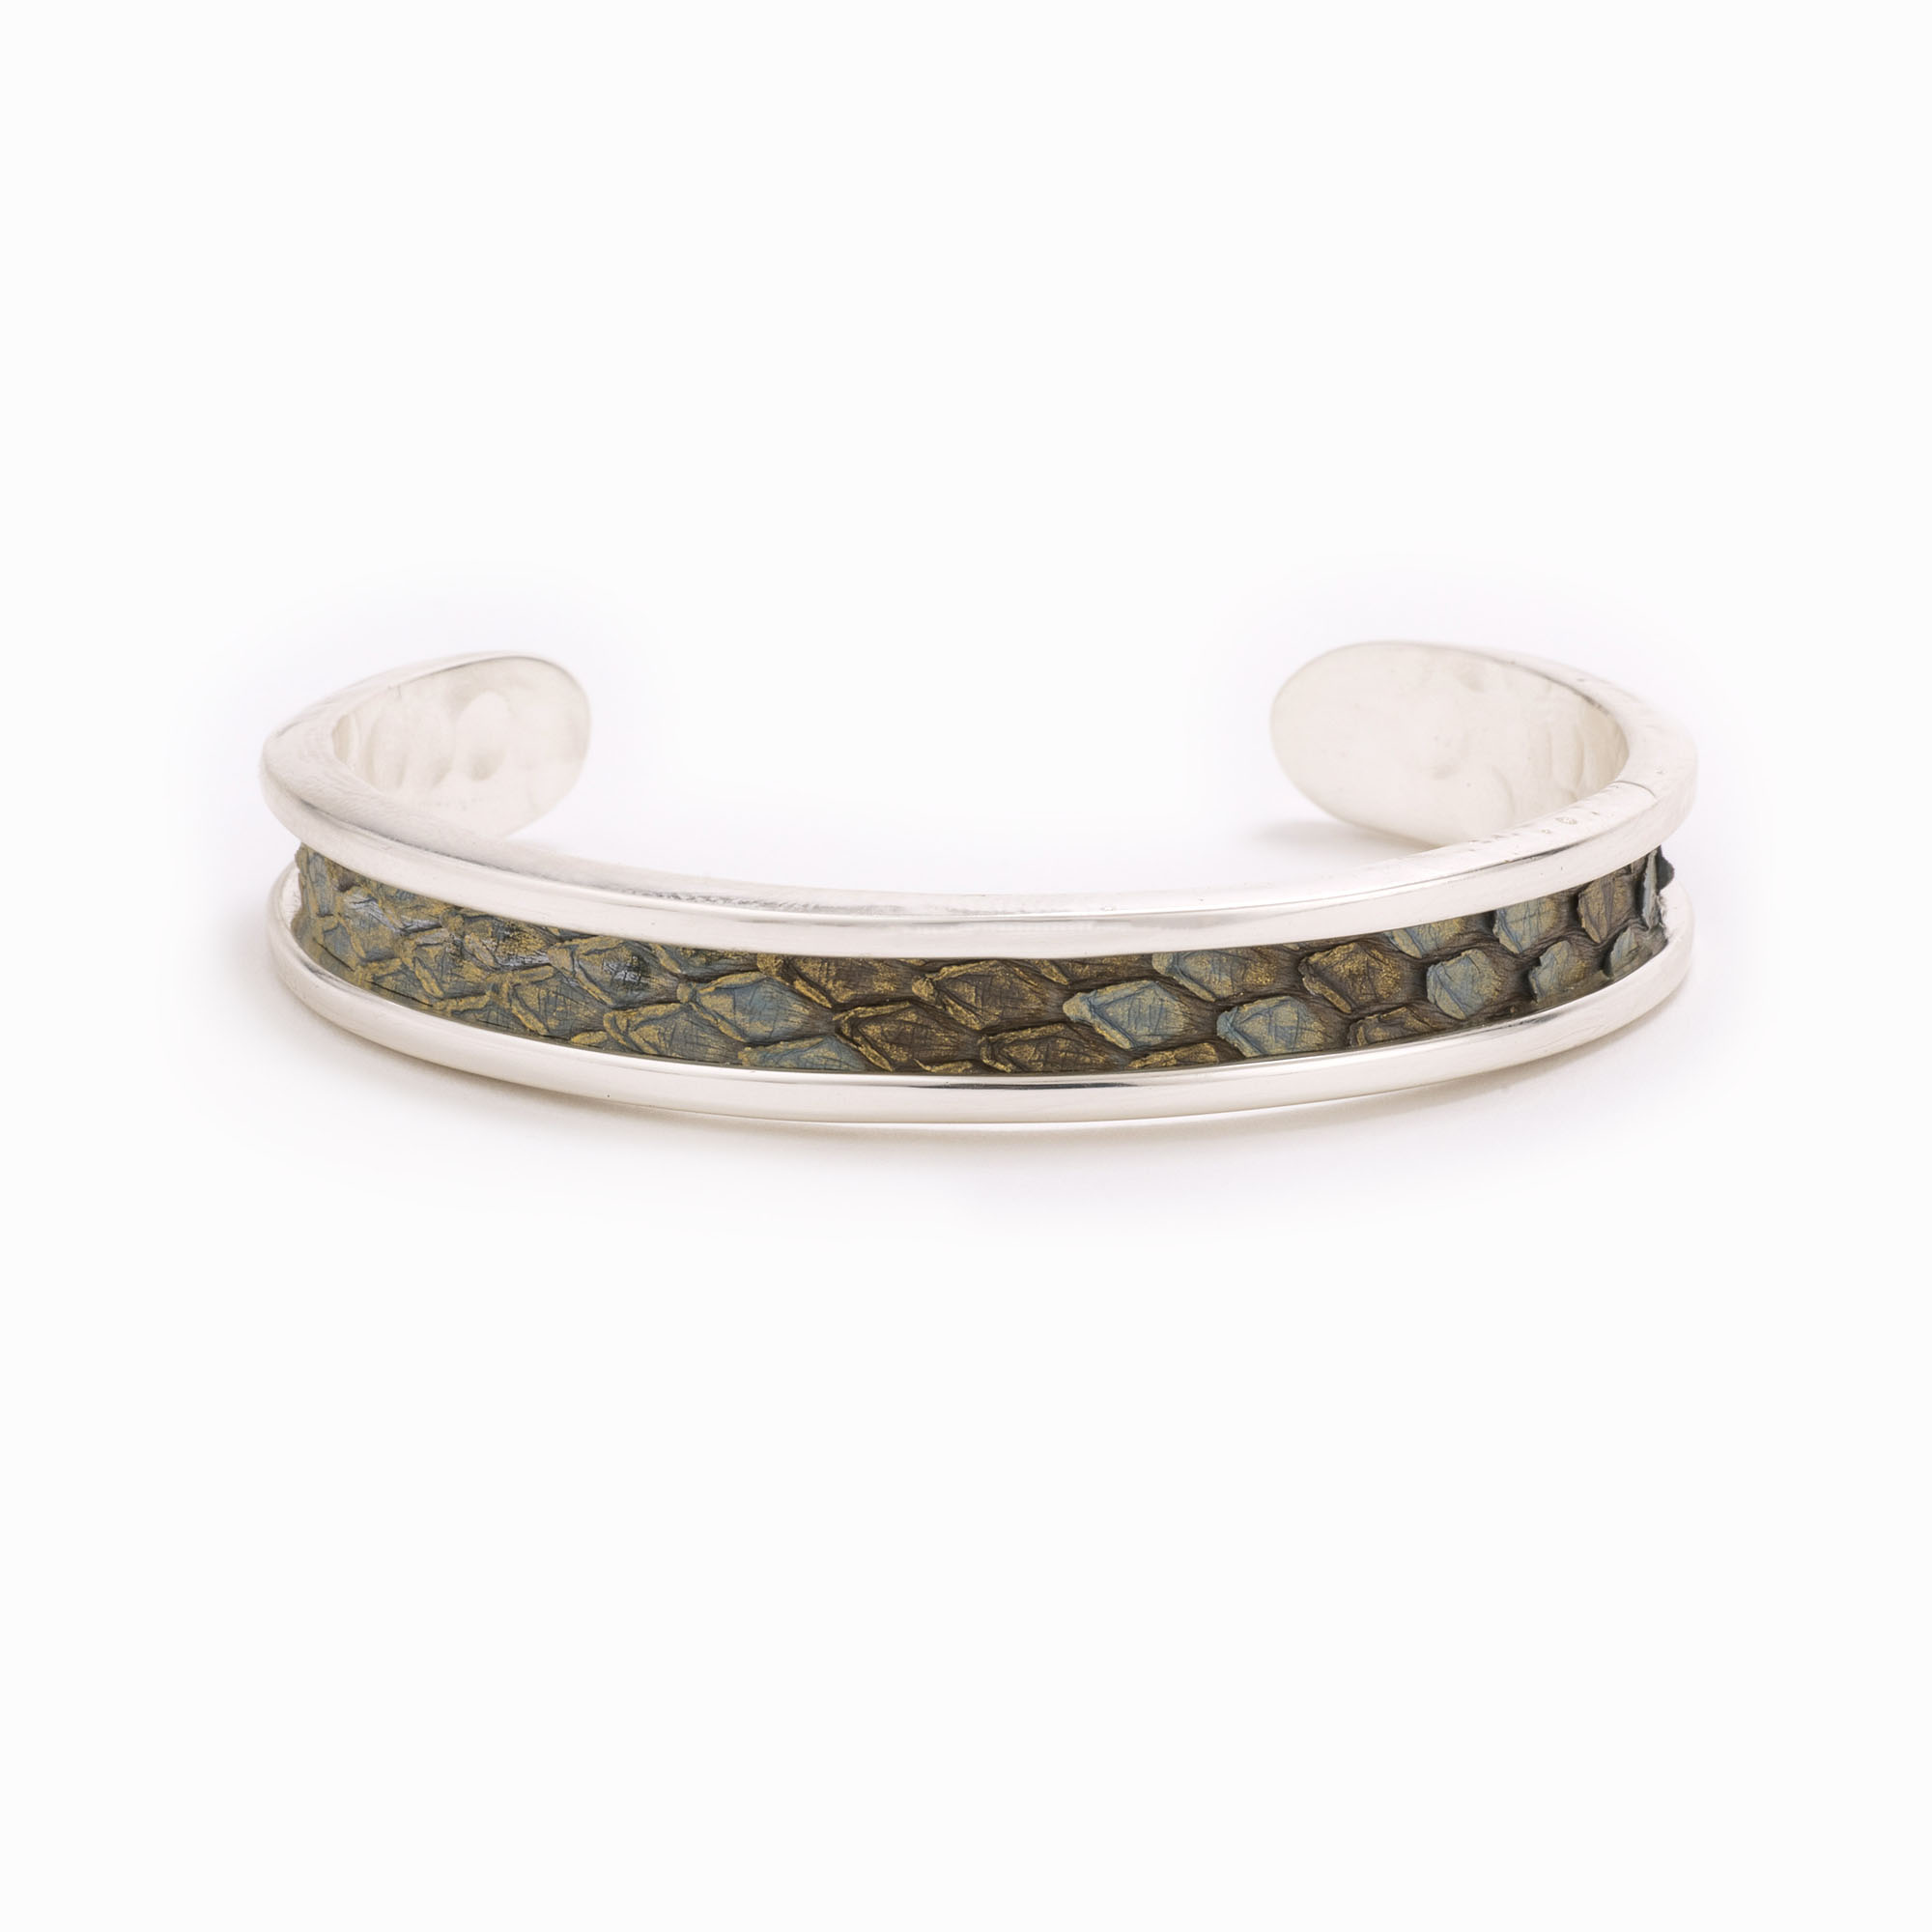 A small silver cuff with blush colored python skin pattern.